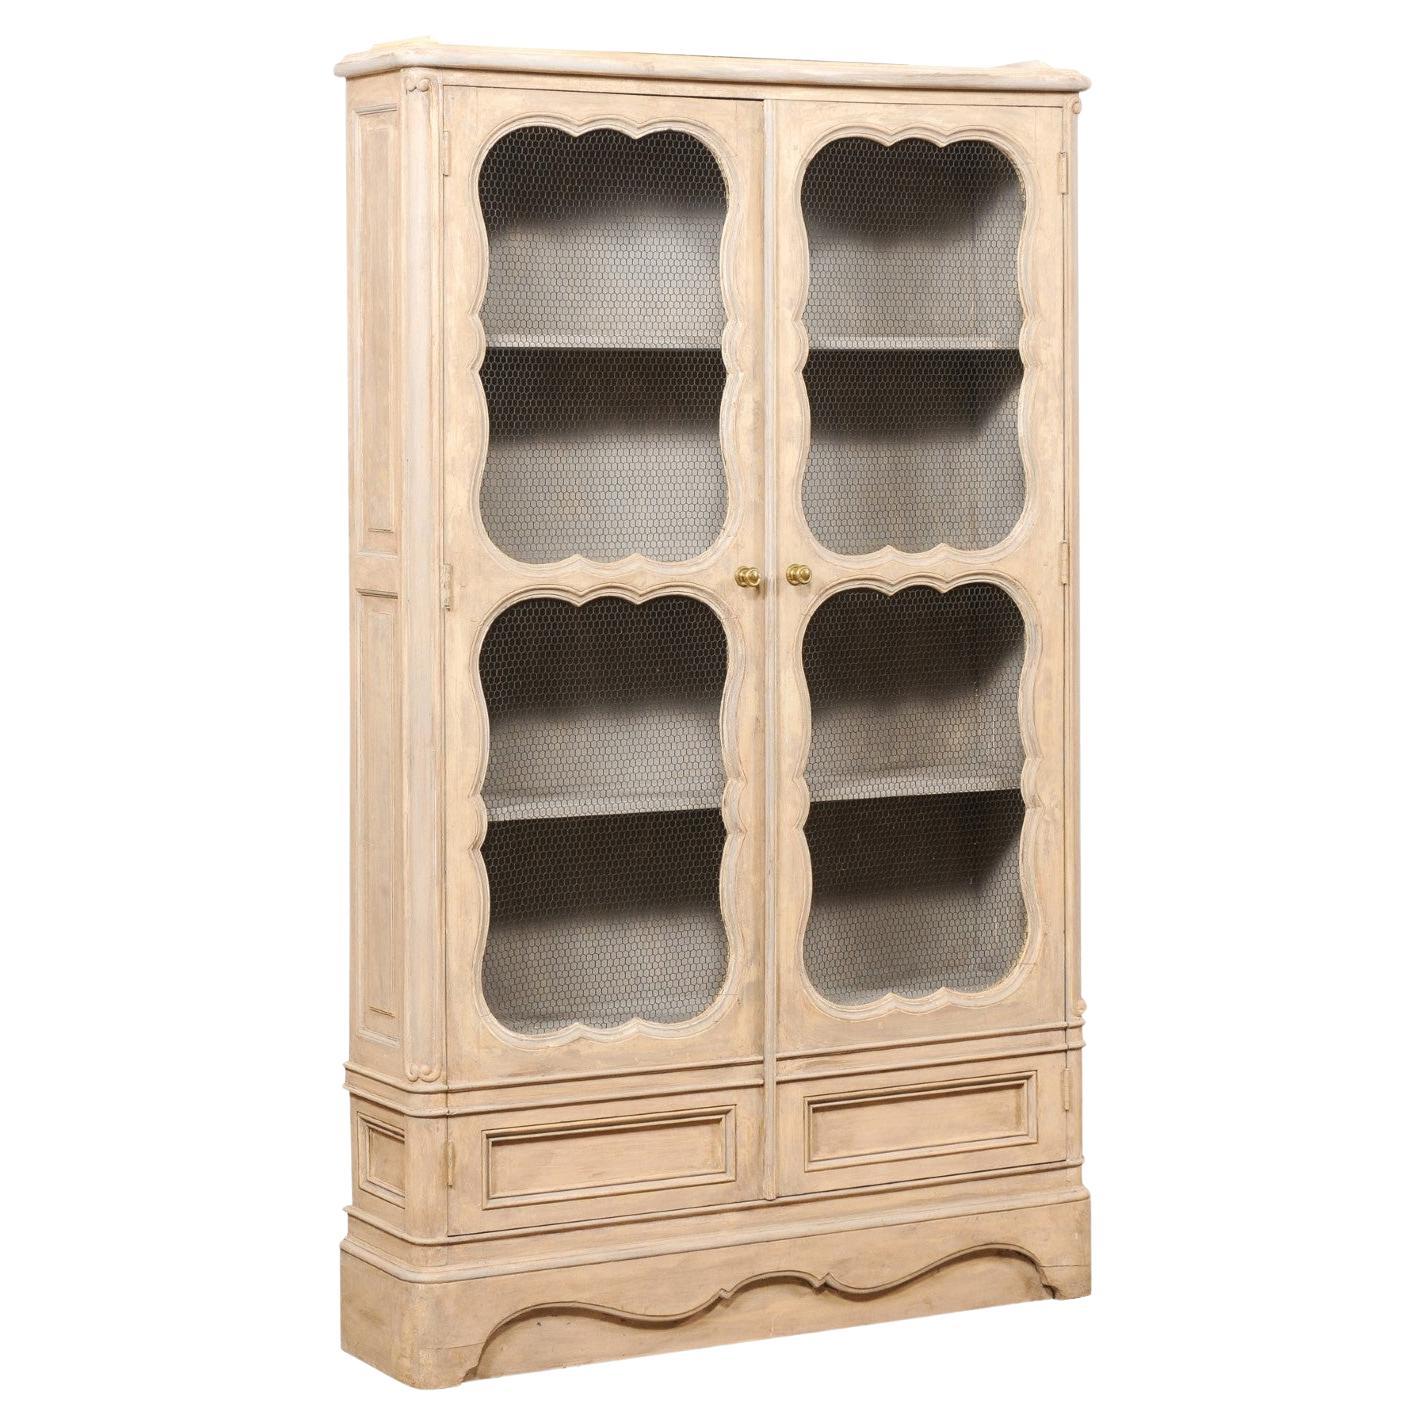 French Painted Wood Bookcase with Chicken-Wire Door Fronts, 6.75 Ft Tall